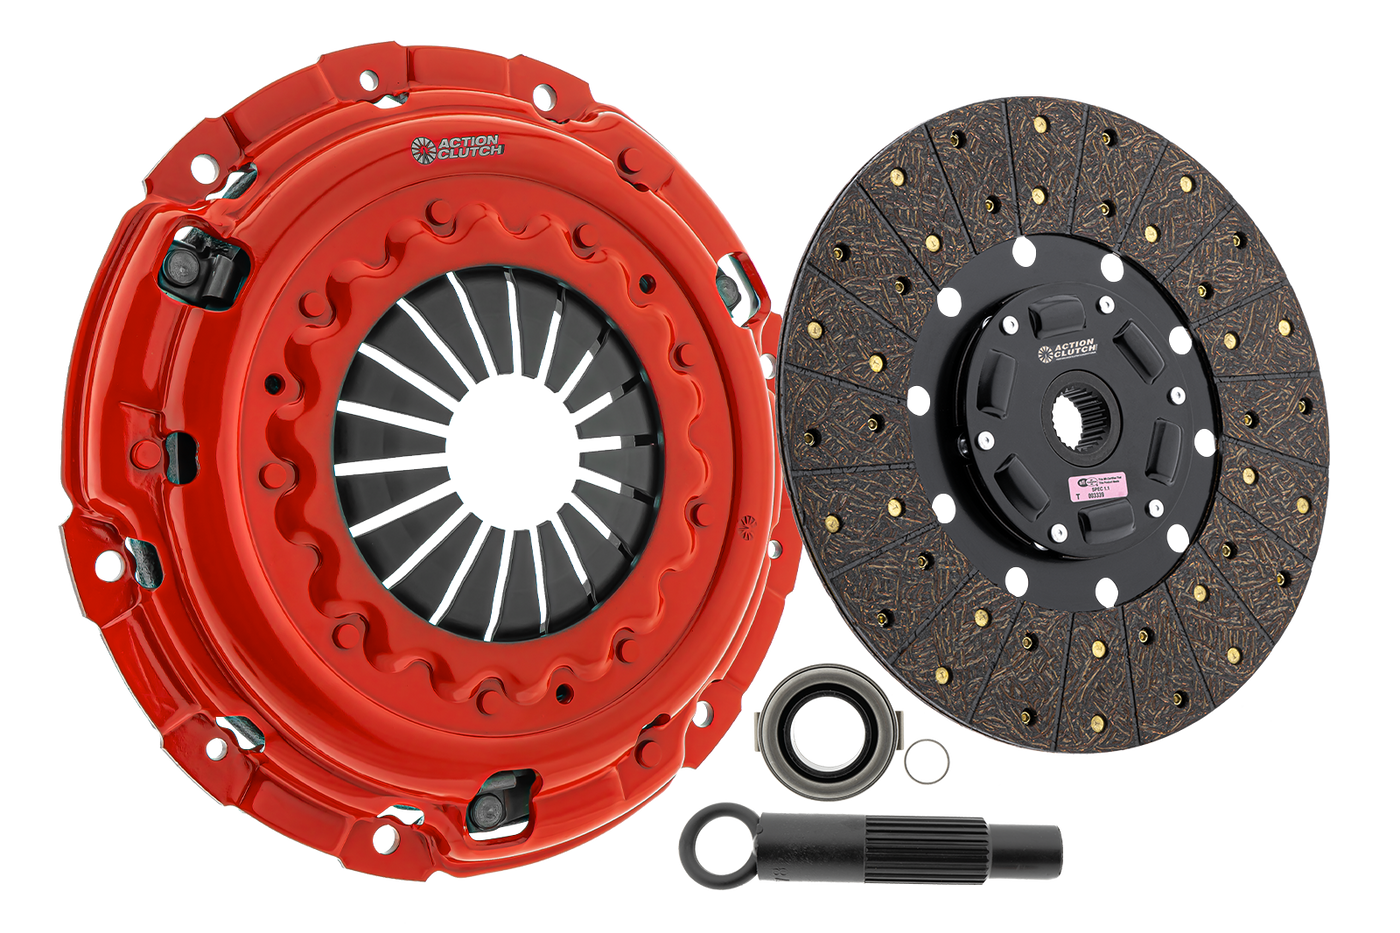 Stage 1 Clutch Kit (1OS) for Mazda Protege 1995-1998 1.5L DOHC